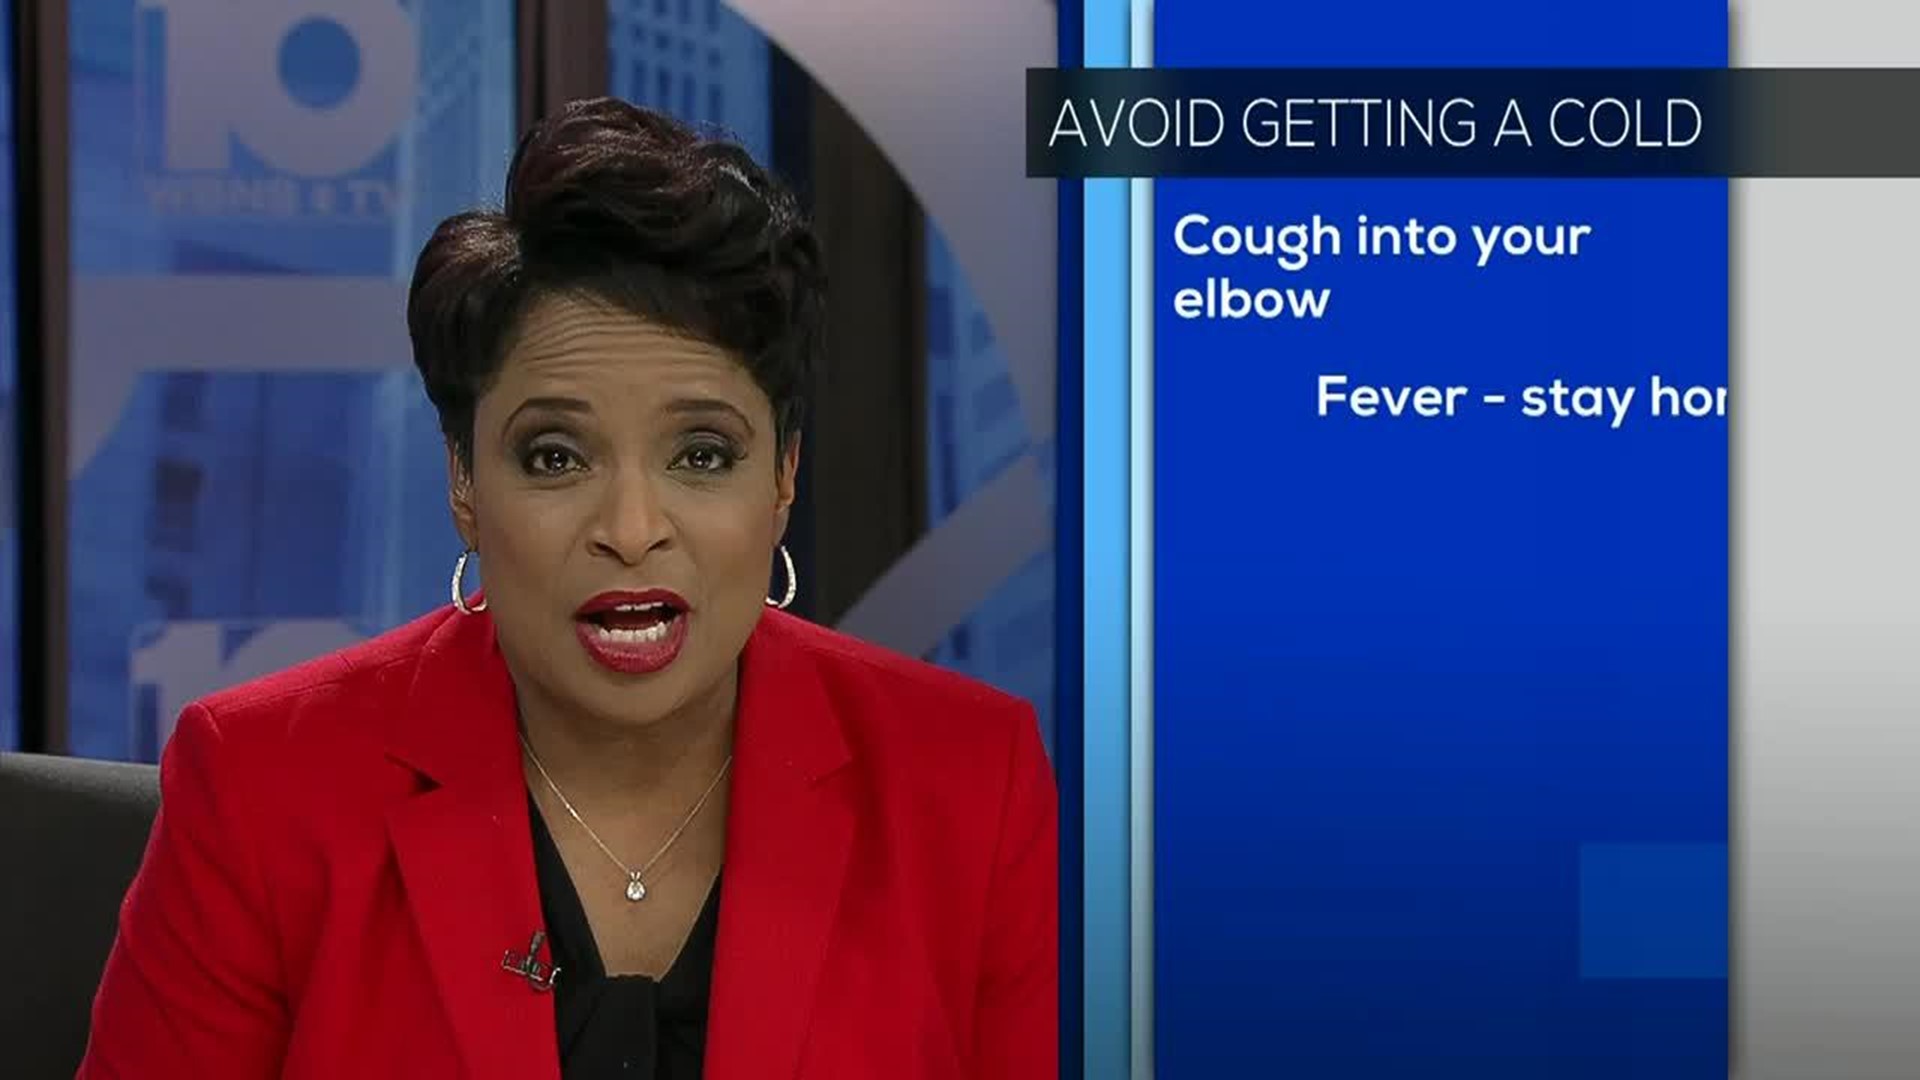 What's Going Around: Is it Cold or Allergies?